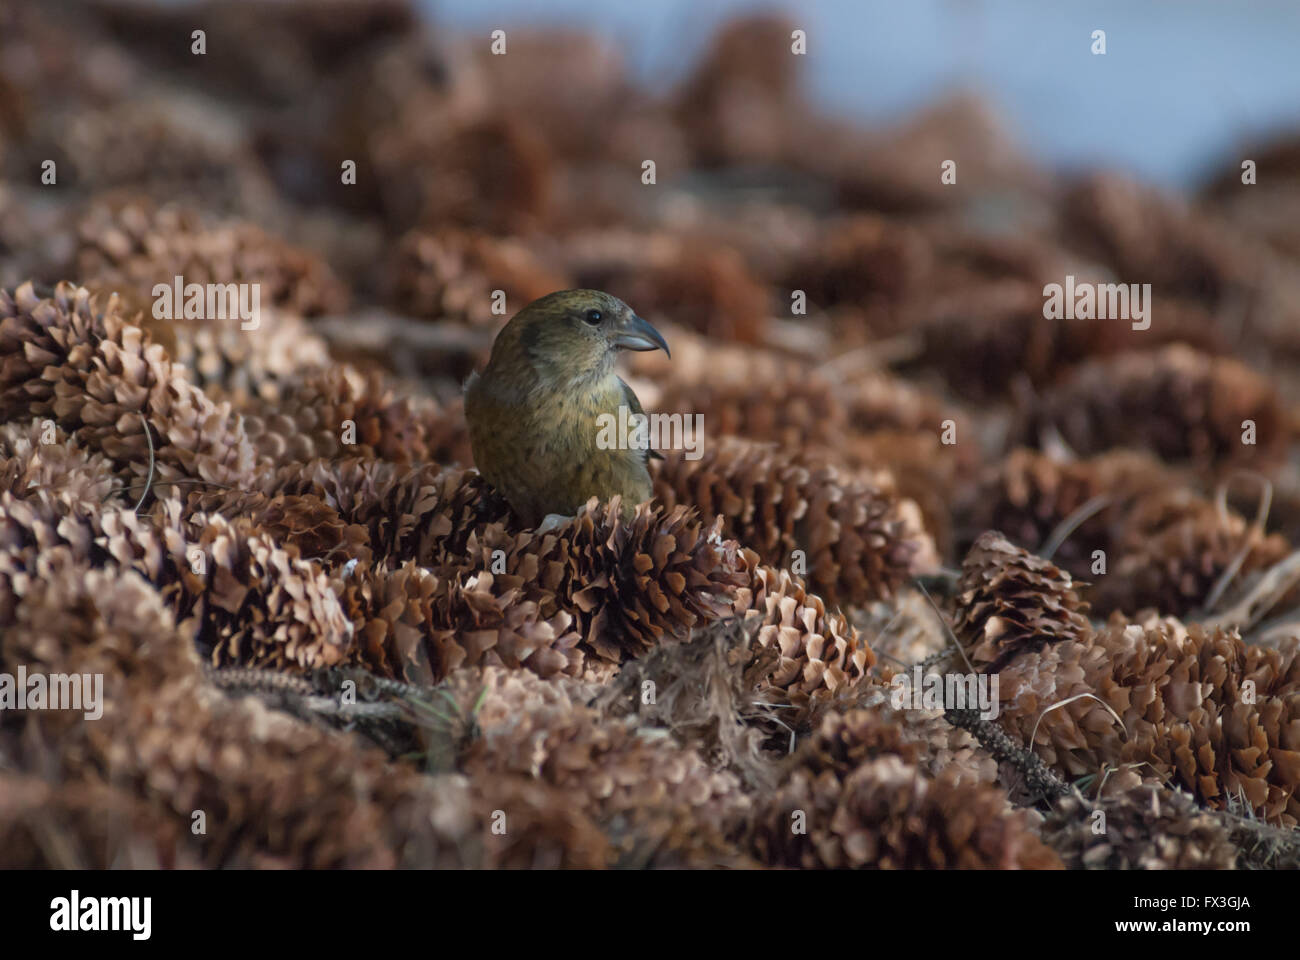 Female white-winged crossbill, Loxia leucoptera, foraging among a pile of spruce cones in St Albert, Alberta, Canada Stock Photo